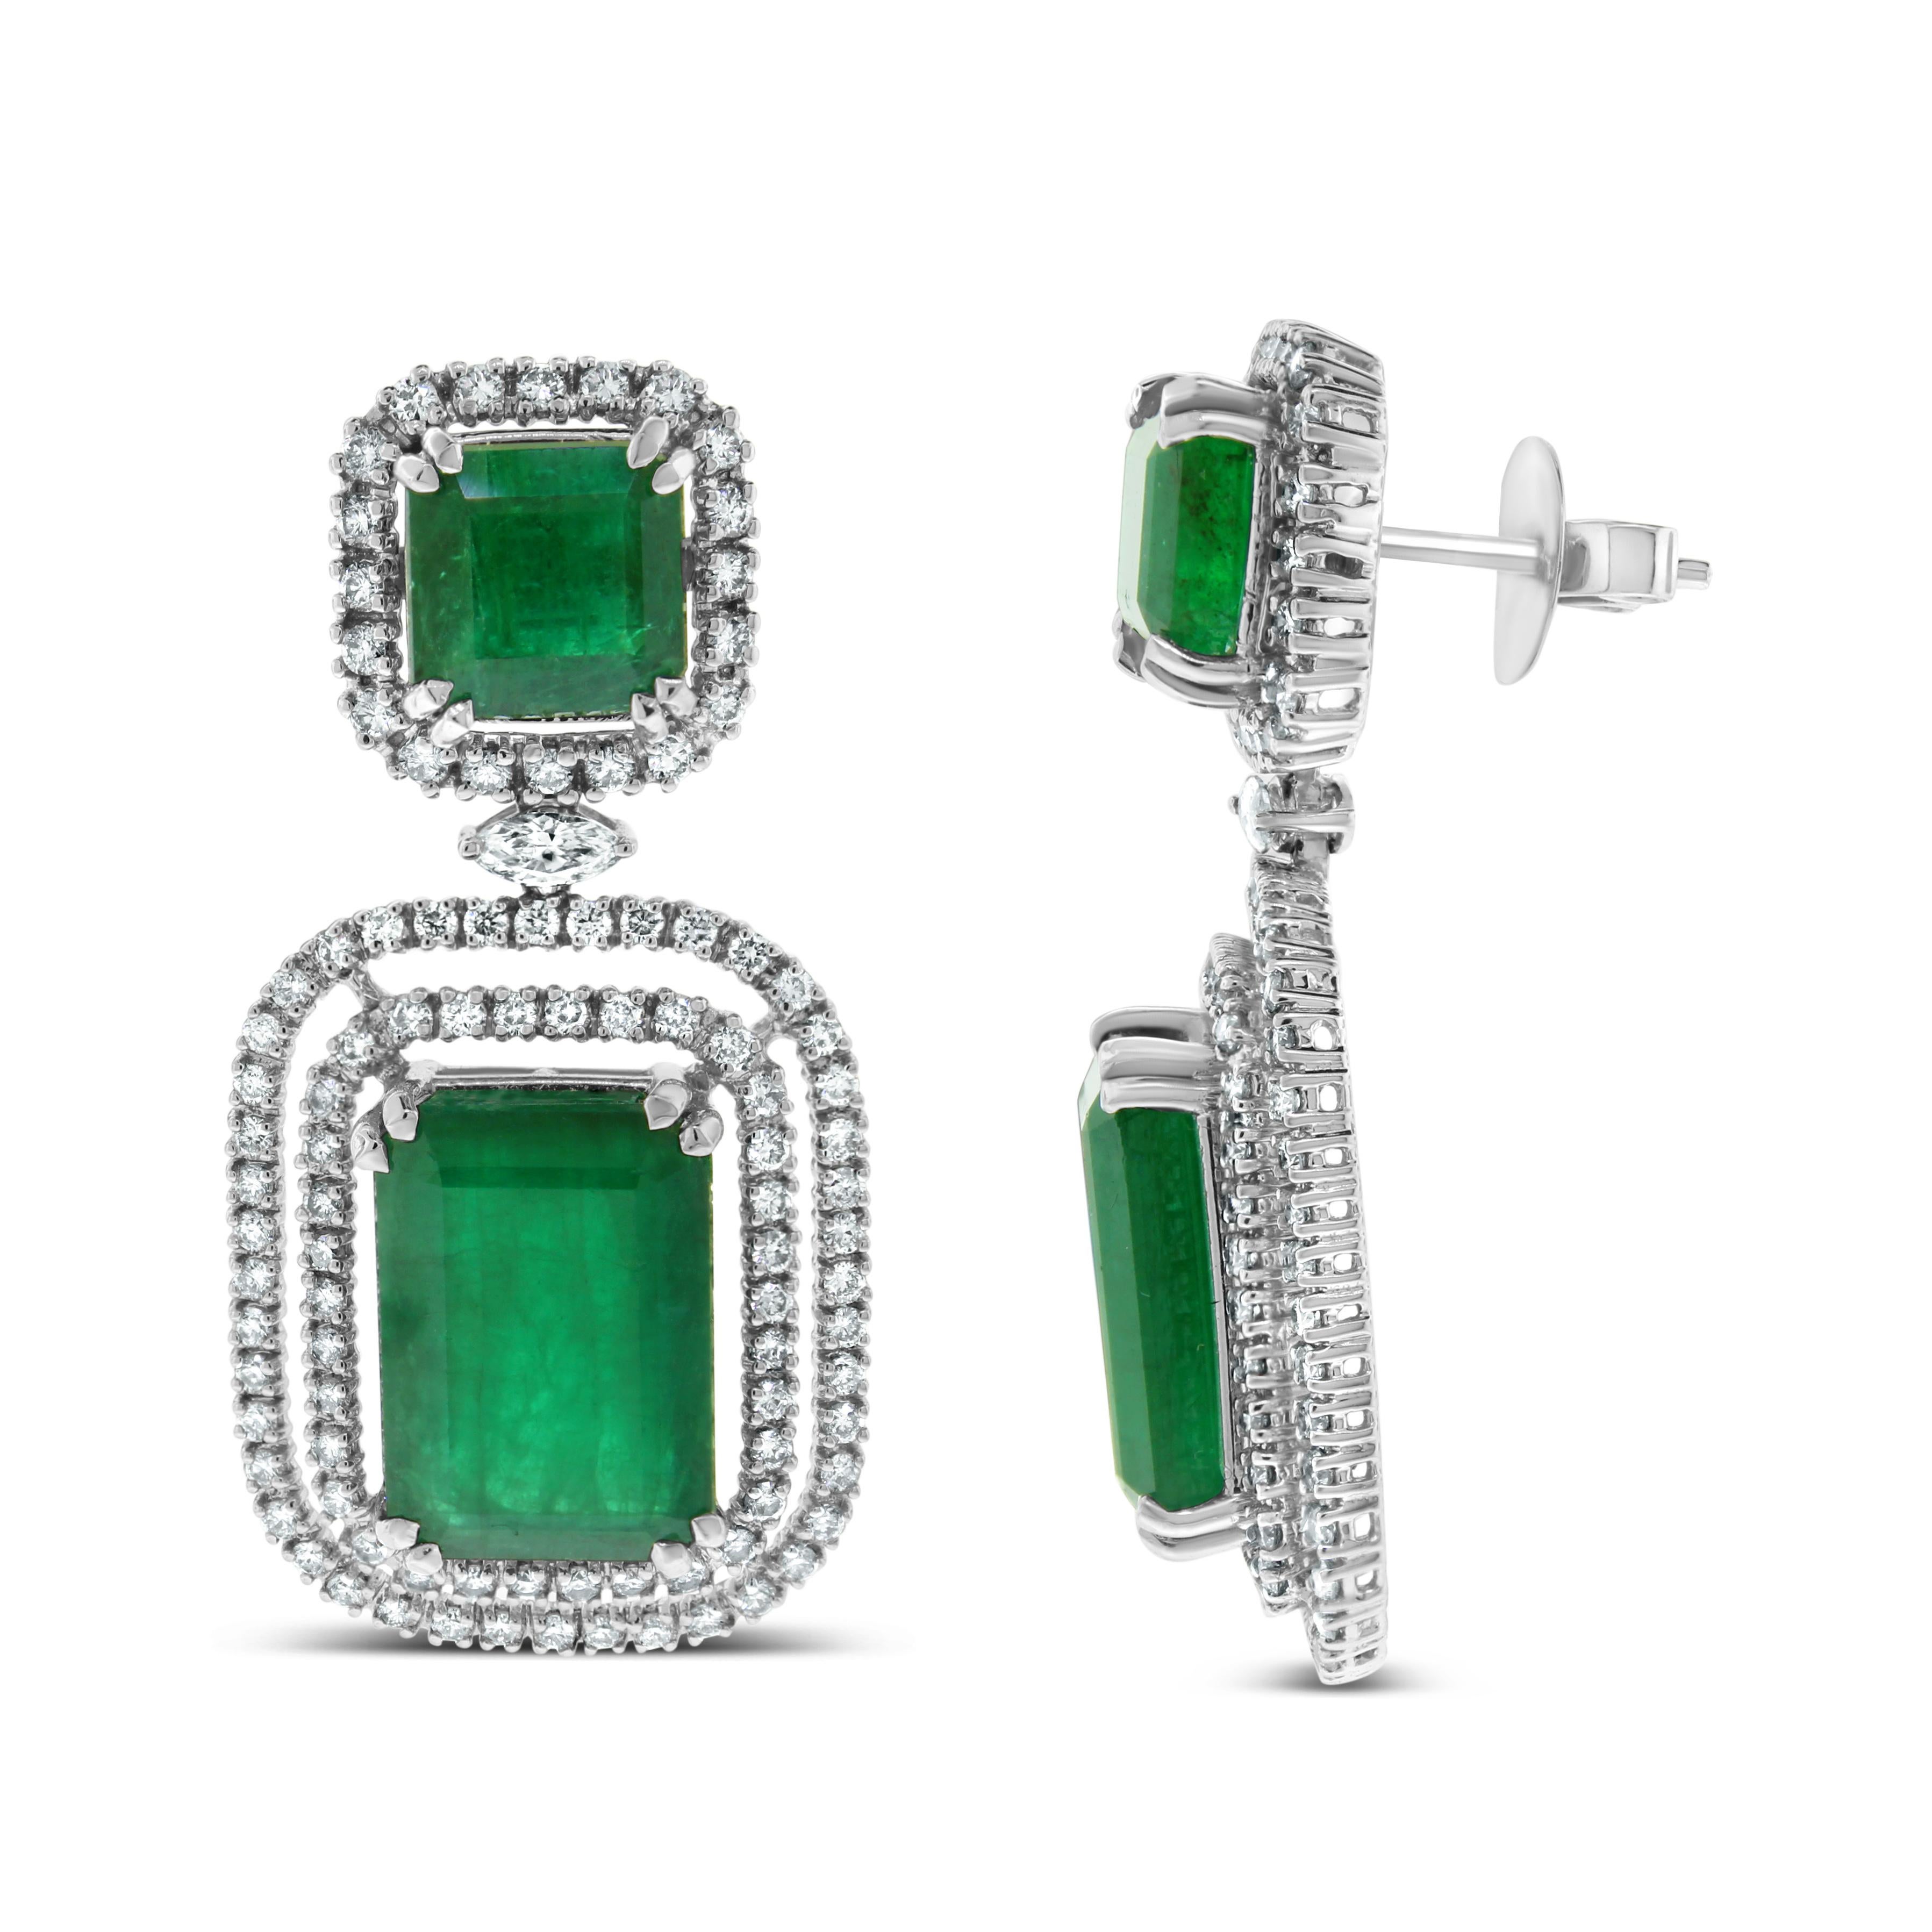 Beauvince Renee Emerald & Diamond Earrings '28.02 Ct Gemstones' in White Gold In New Condition For Sale In New York, NY